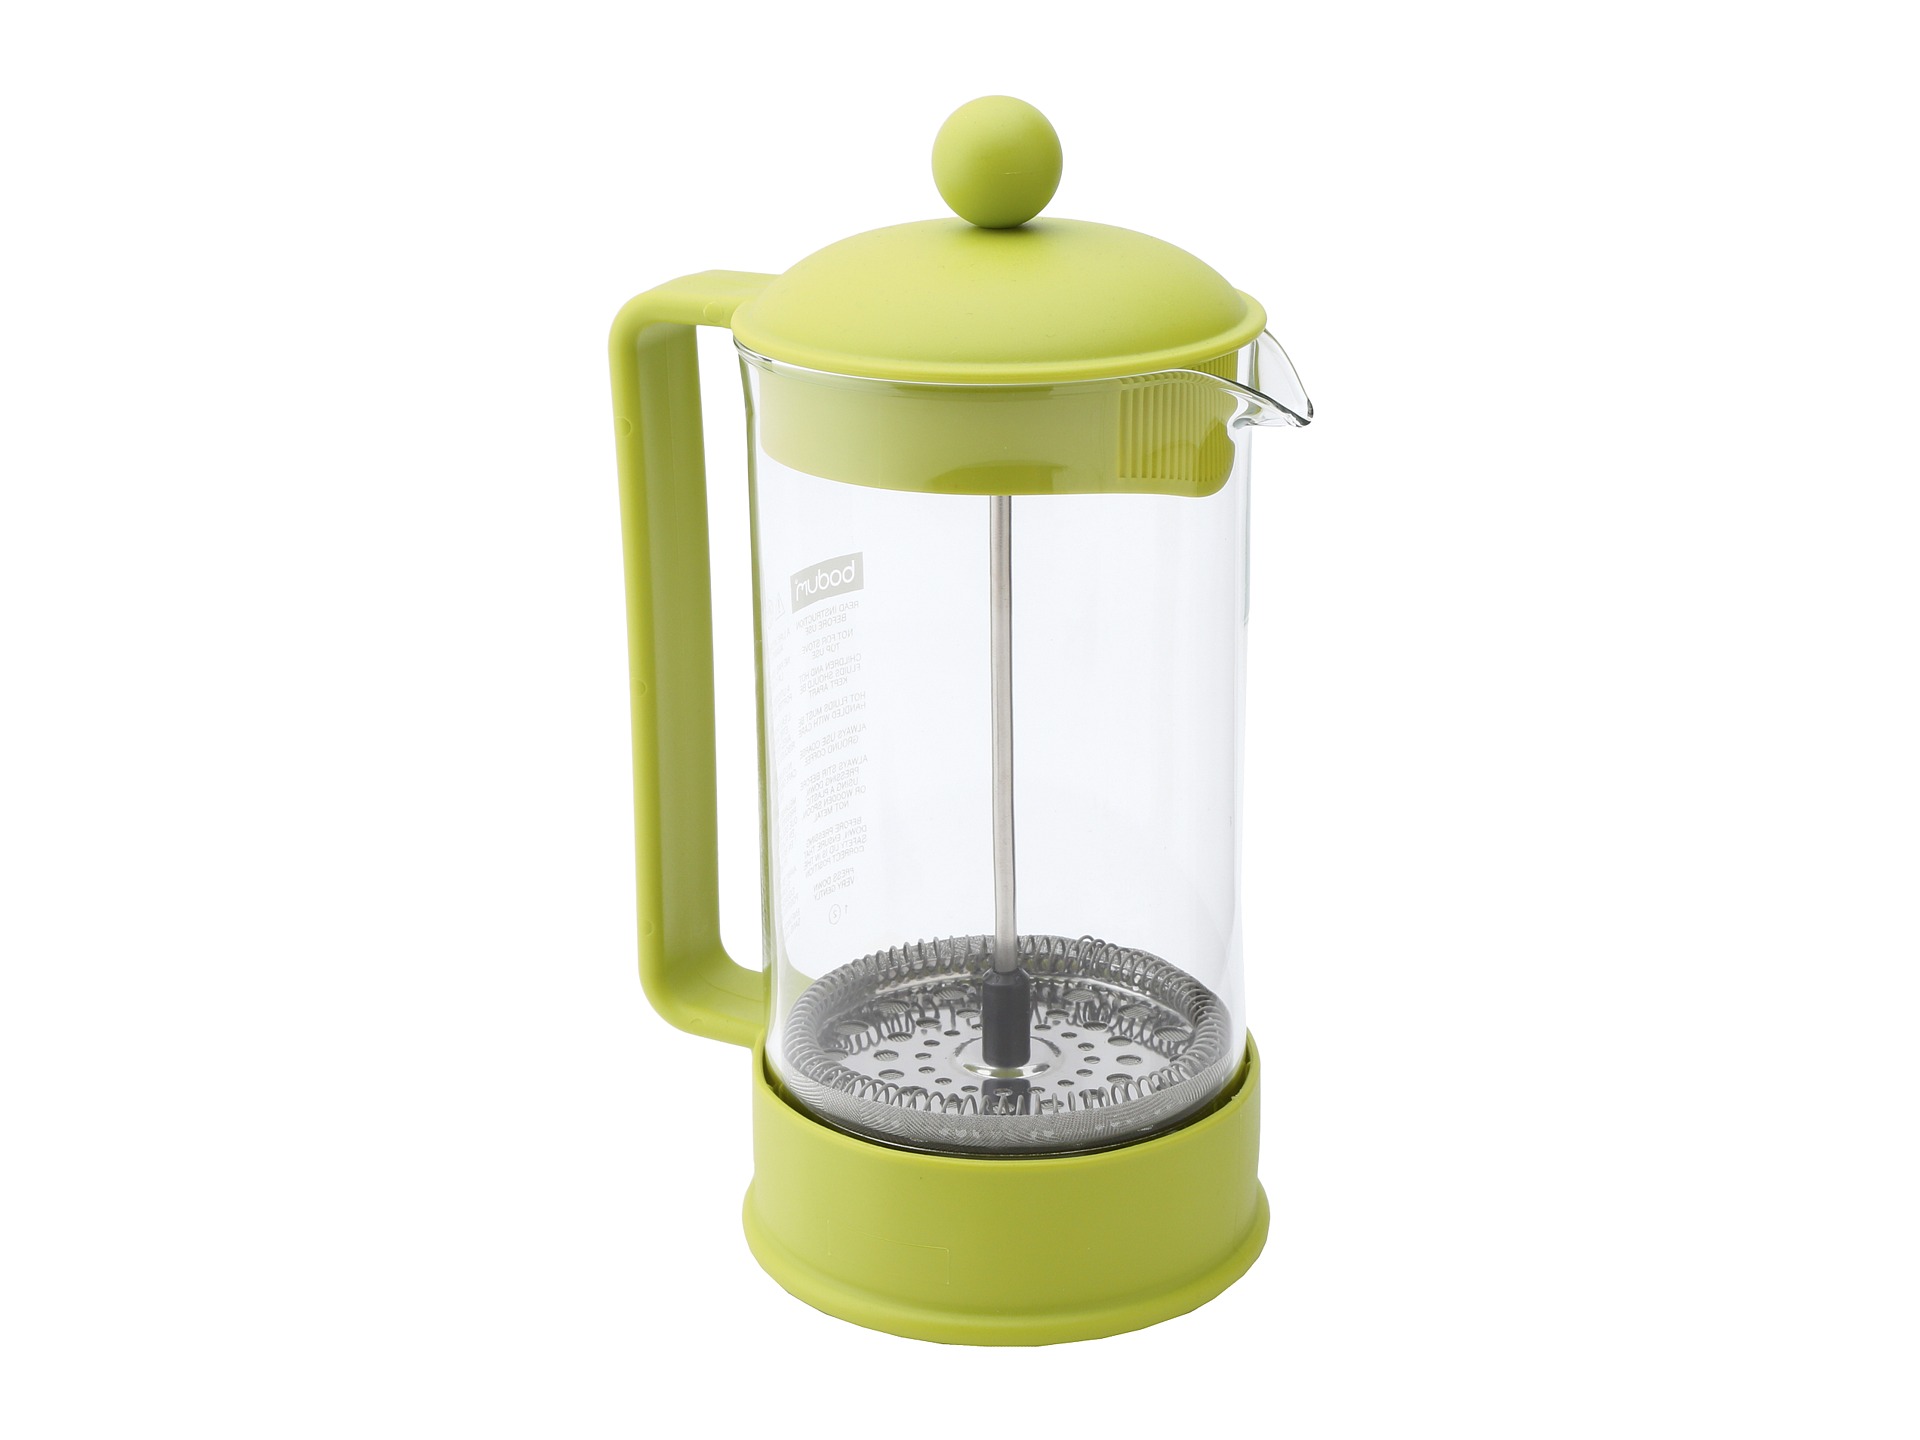 https://www.thechosenbean.com/product_images/uploaded_images/green-french-press.jpg